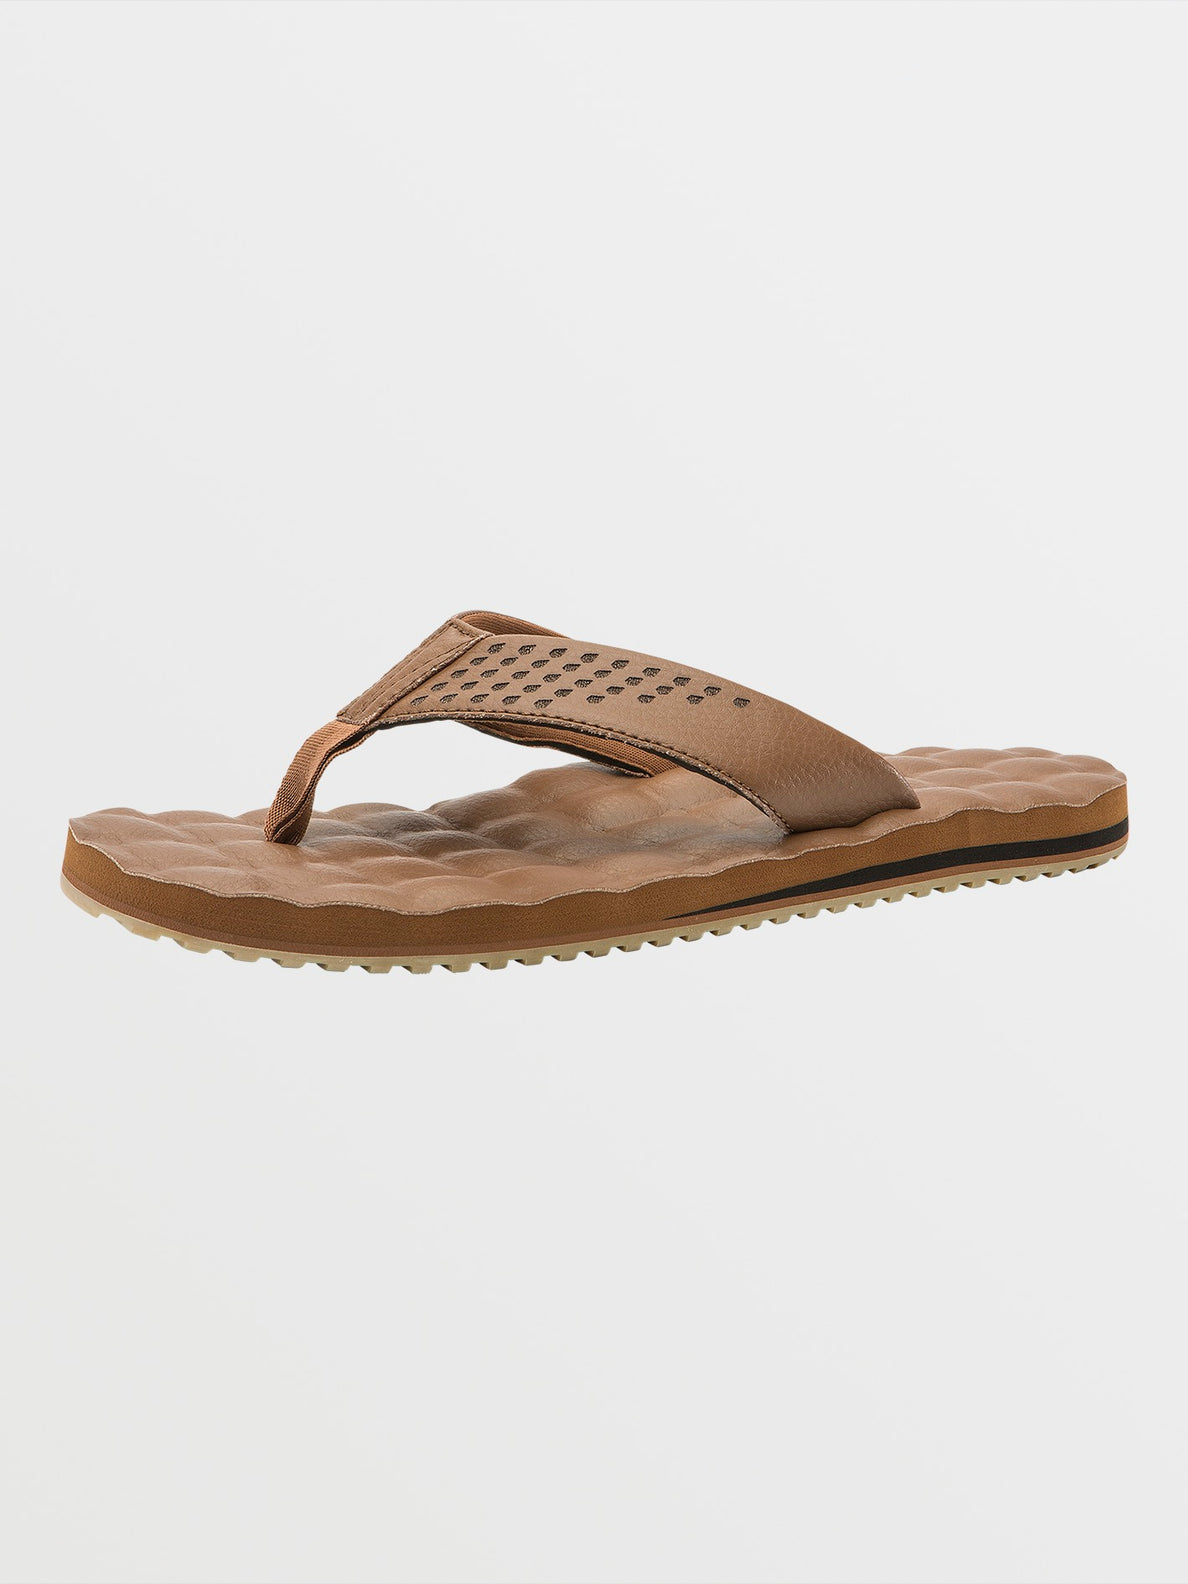 Recliner Leather Sandals - Brown